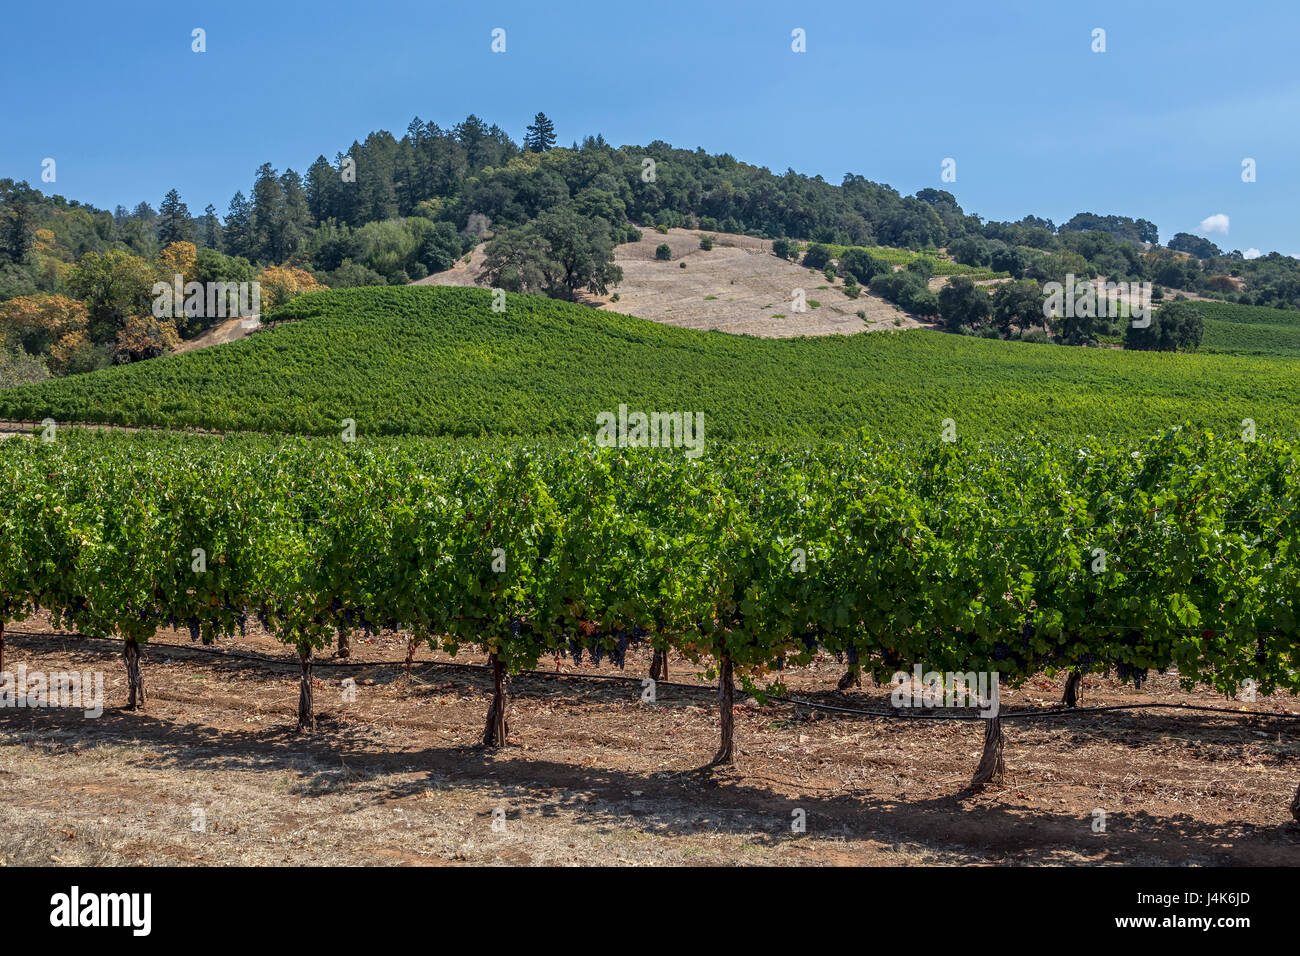 grape vineyard, grape vineyards, vineyard, vineyards, view from Hanna Winery and Vineyards, Healdsburg, Alexander Valley, Sonoma County, California Stock Photo